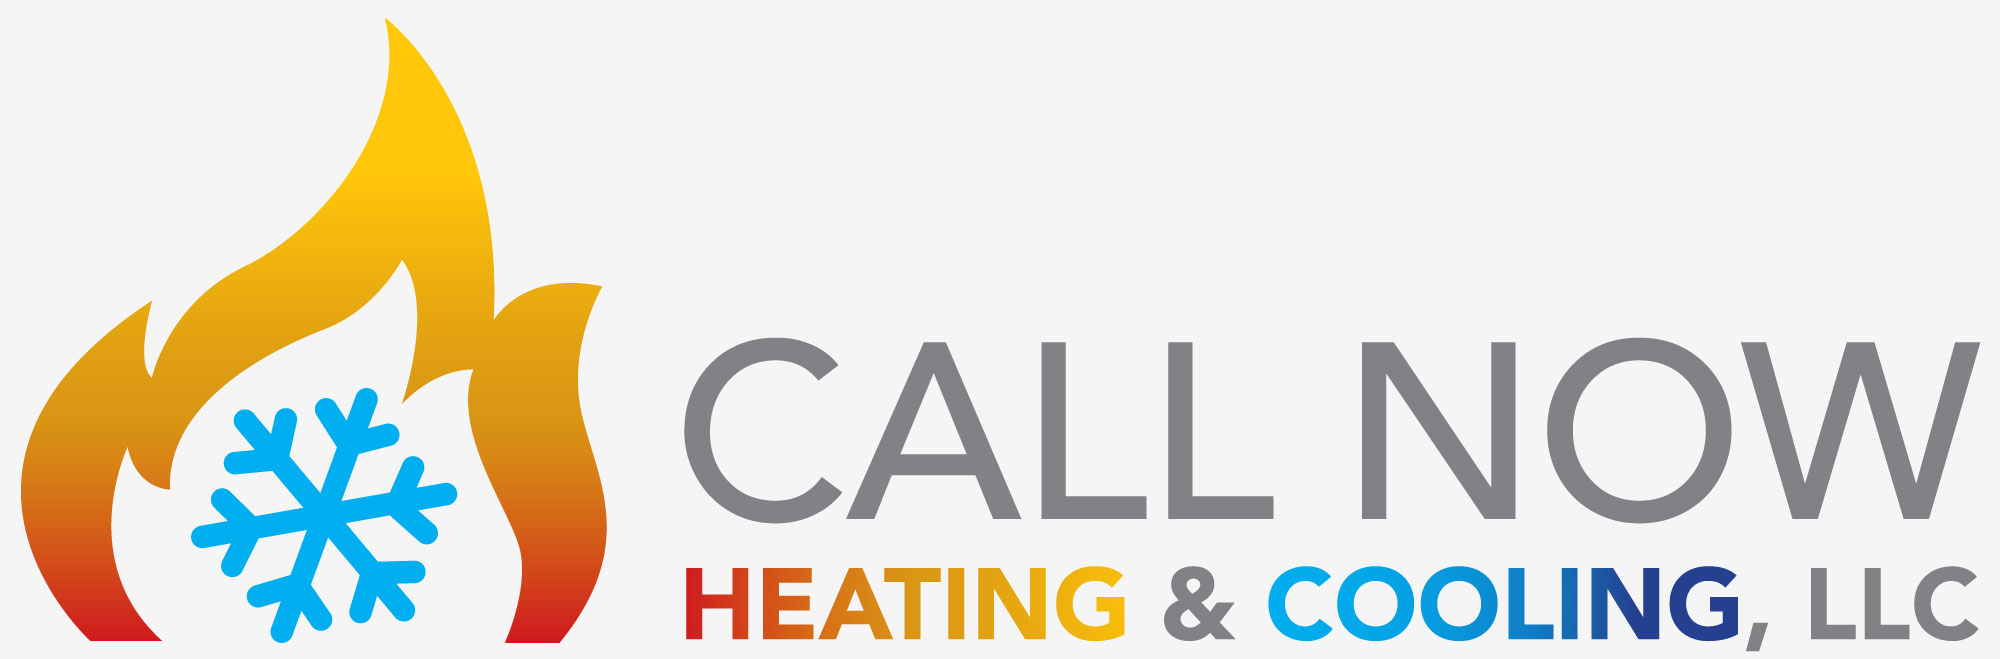 Call Now Heating and Cooling Expands Operations with Acquisition of Phoenix Comfort Systems